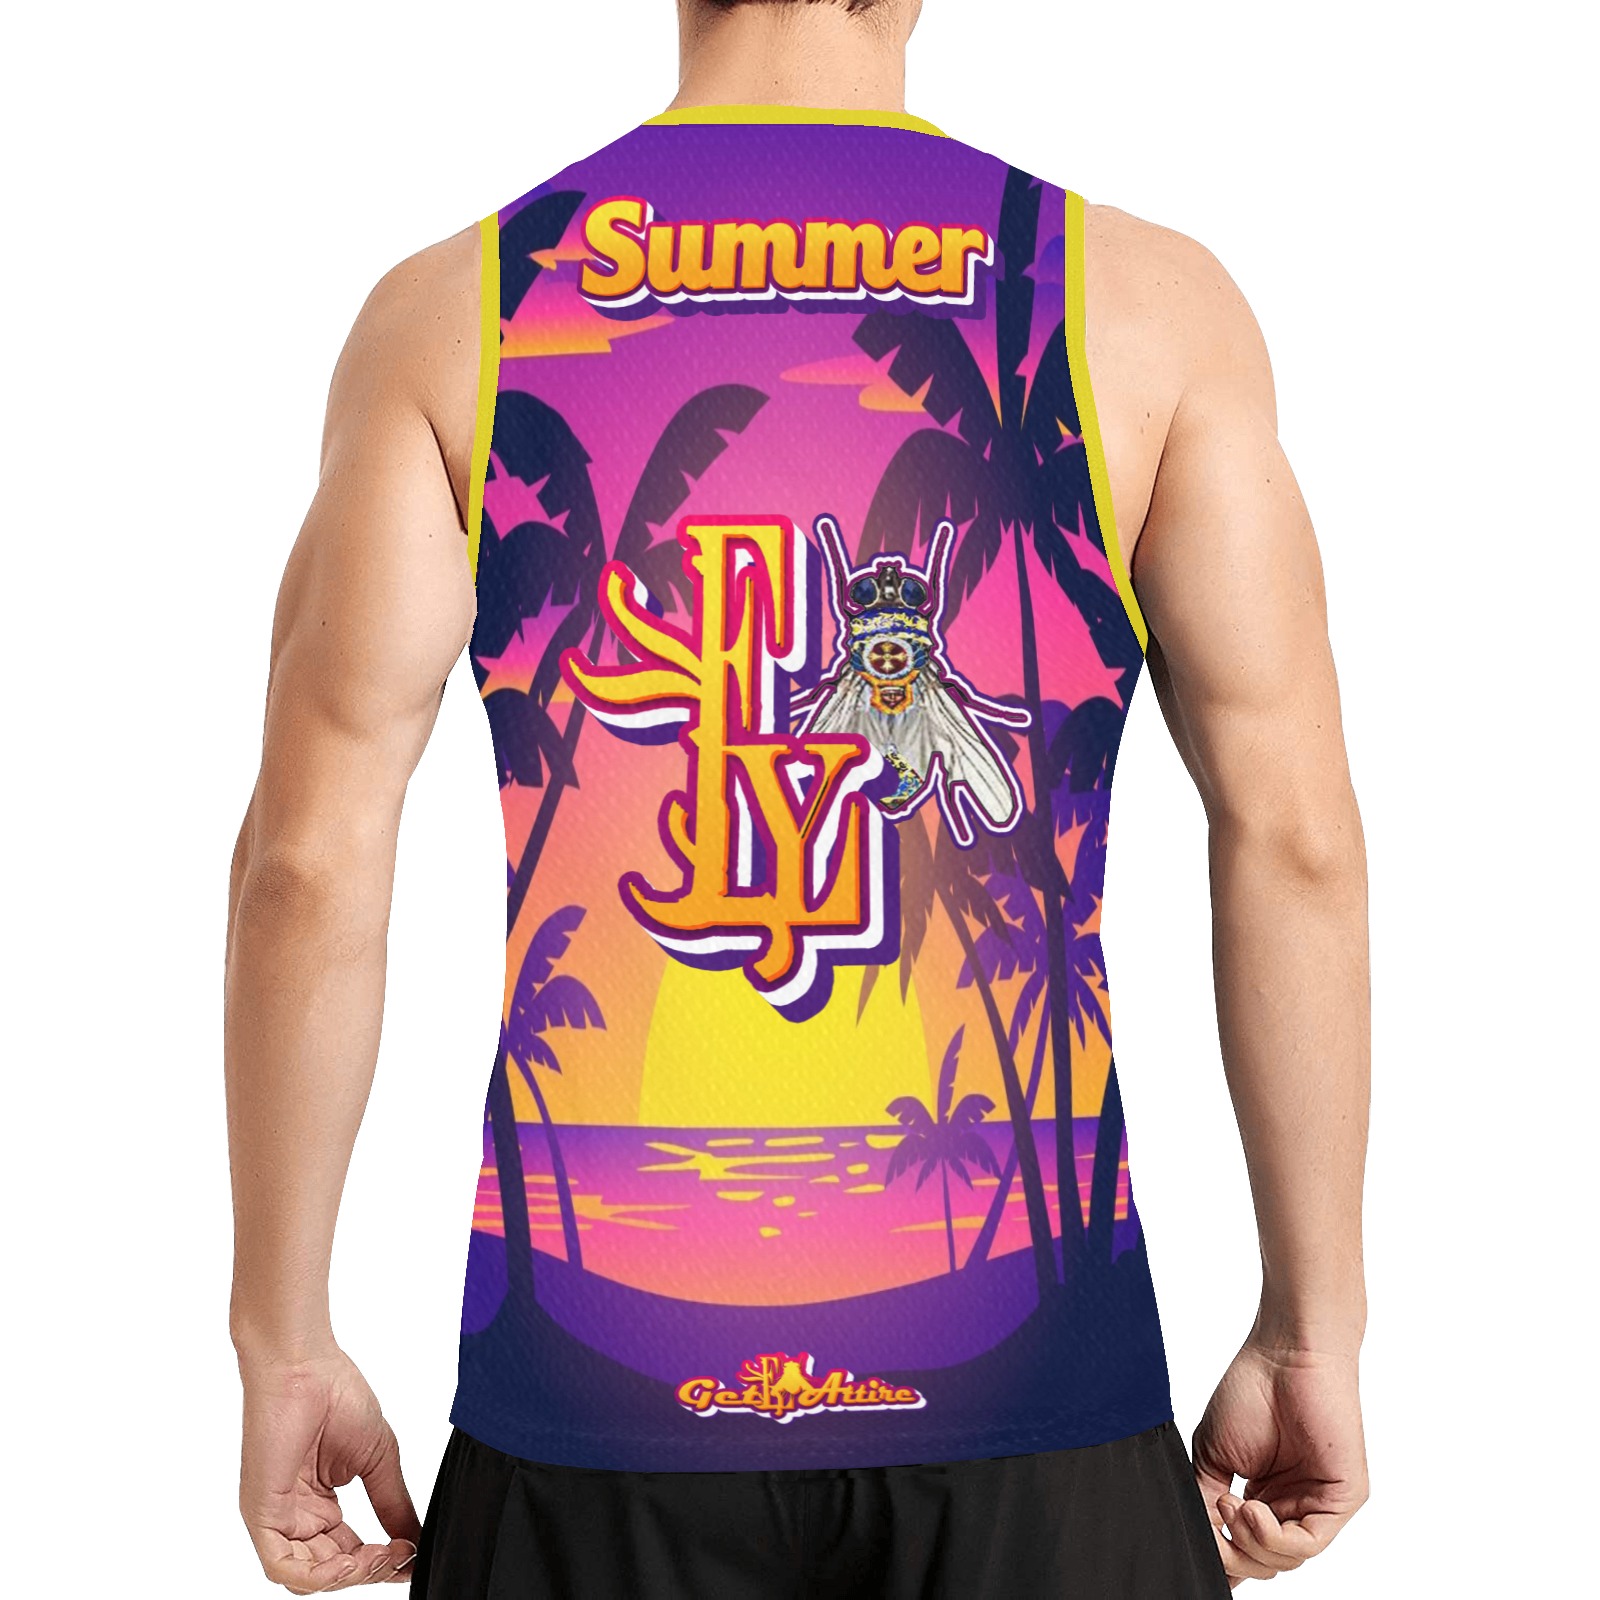 Summer Collectable Fly All Over Print Basketball Jersey